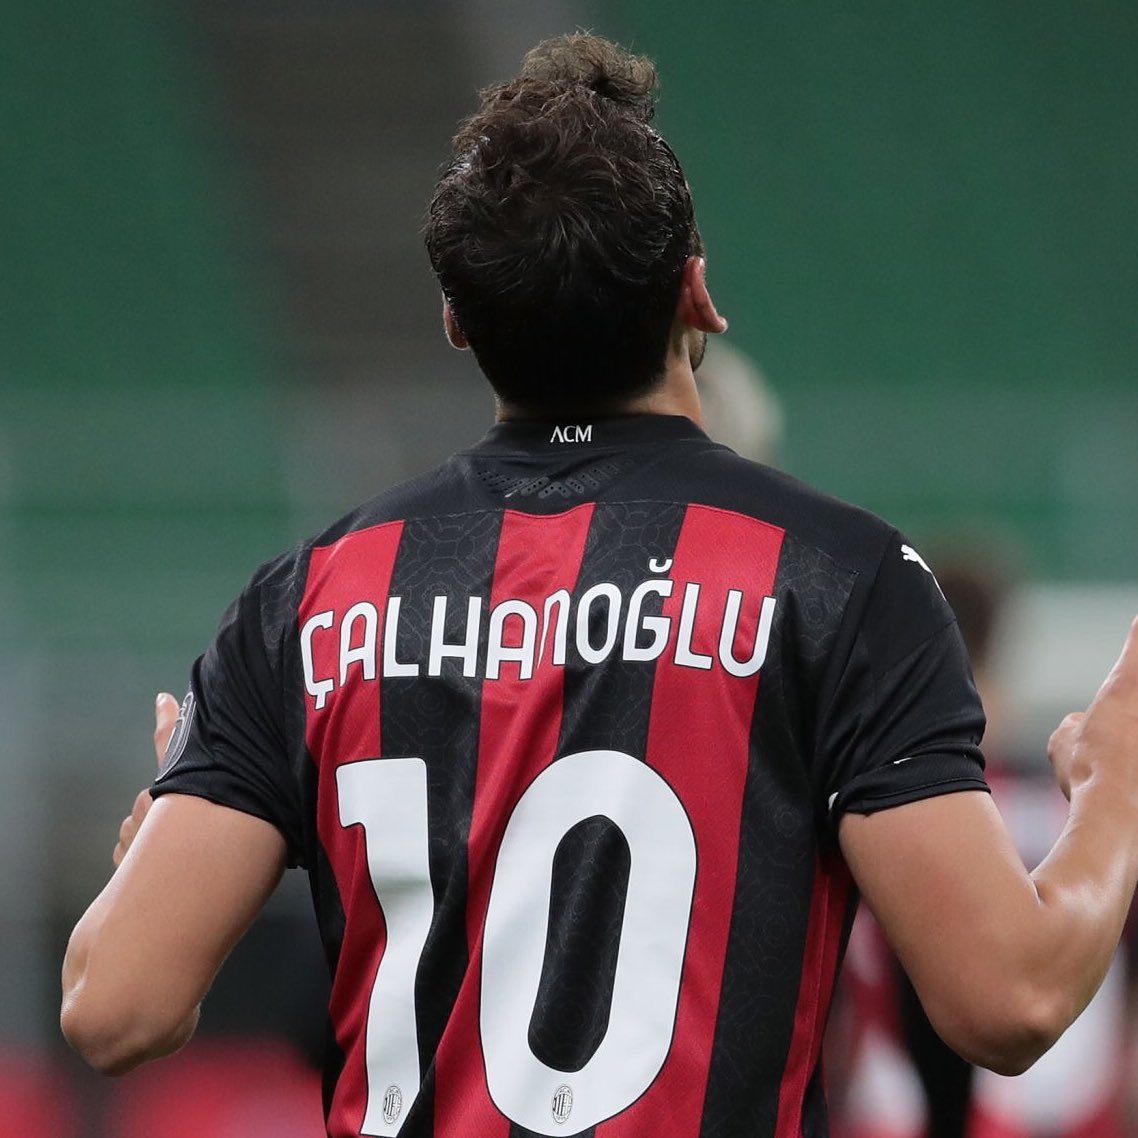 Thread on how to properly pronounce some Milan players’ names (because why not ) :